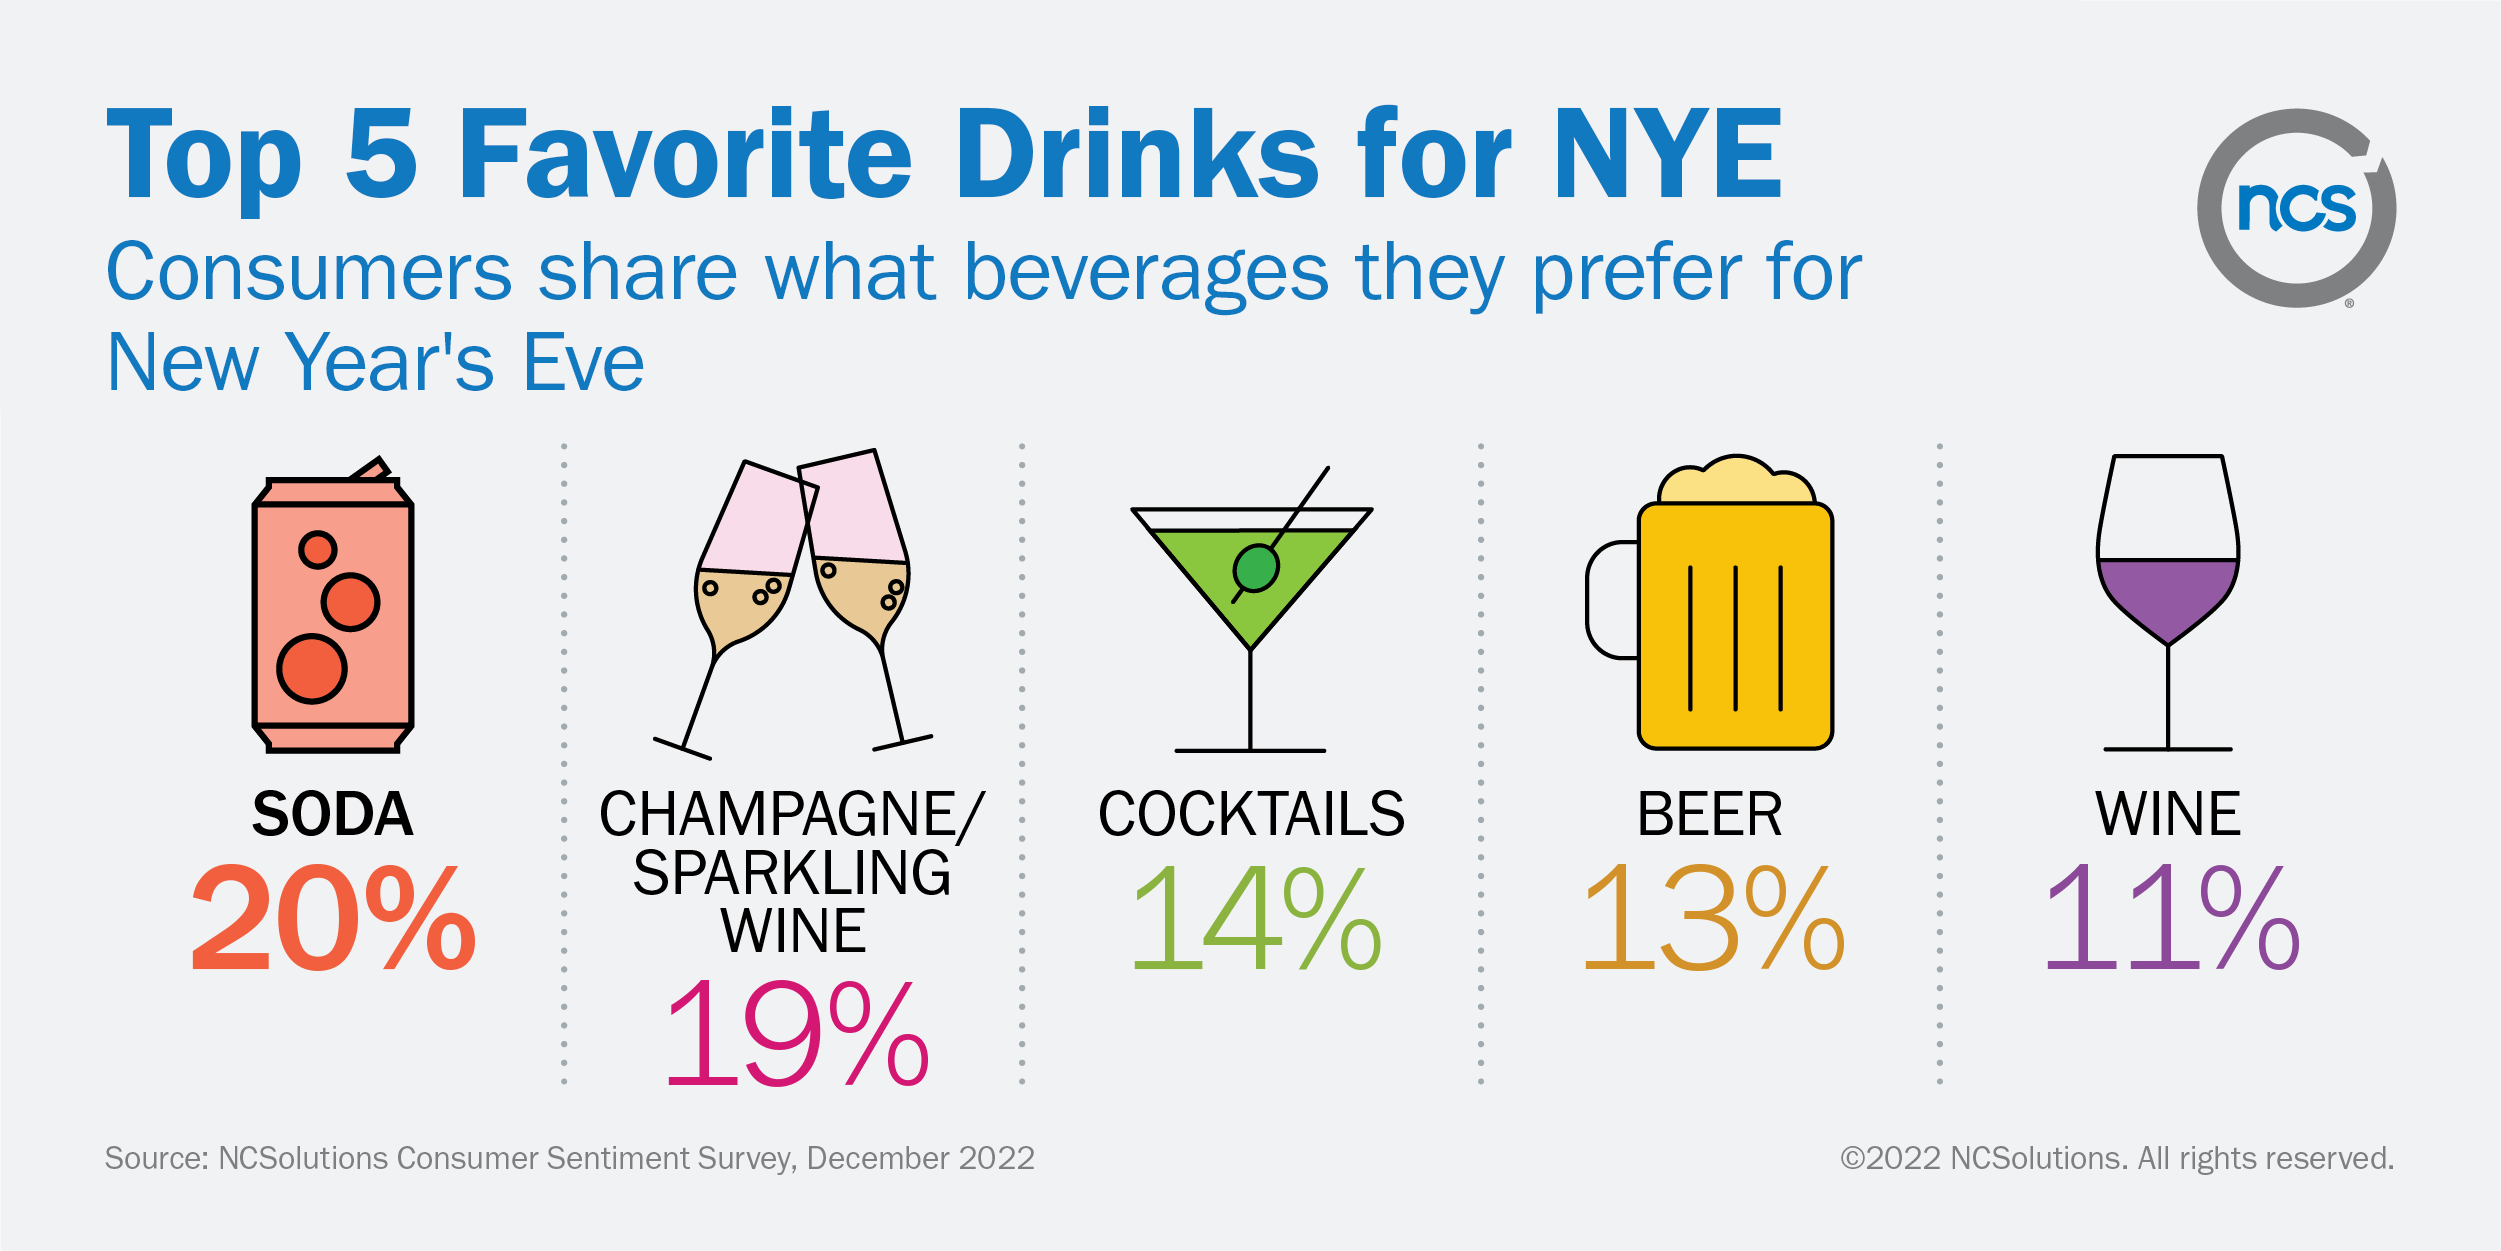 Soda, champagne/sparkling wine, cocktails, beer, and wine are U.S. consumers top five favorite drinks for New Years Eve. 